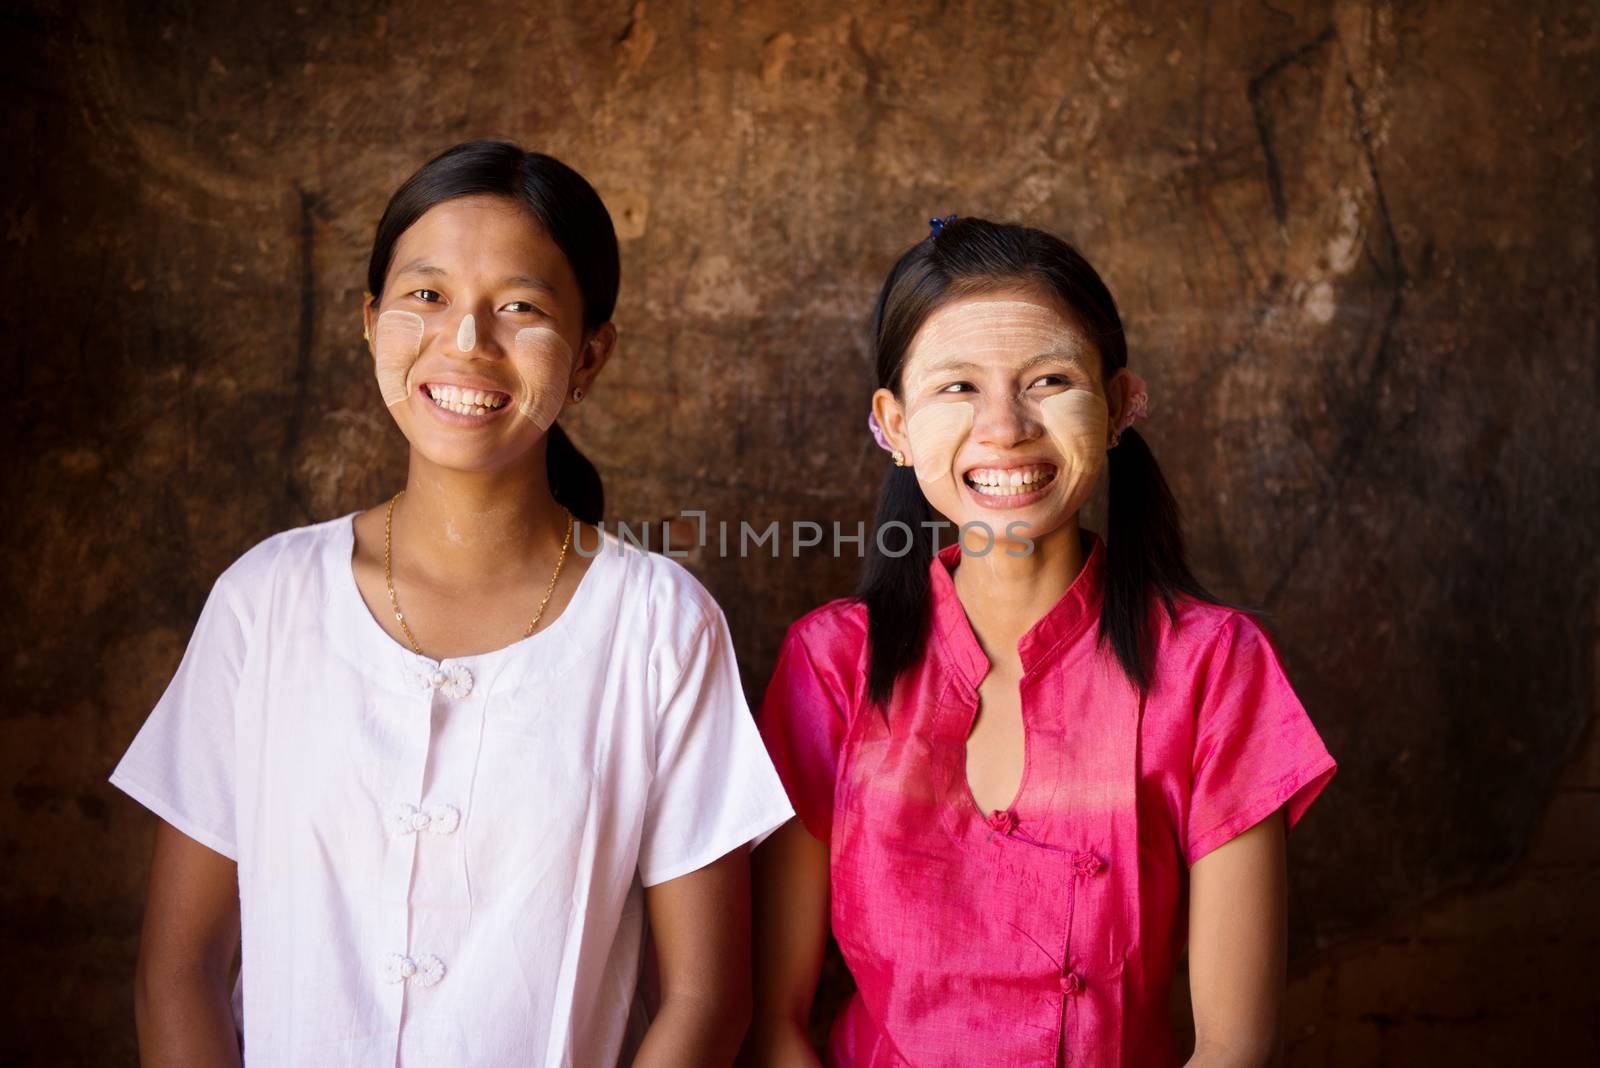 Portrait of beautiful young traditional Myanmar girls smiling. Close up head shot.